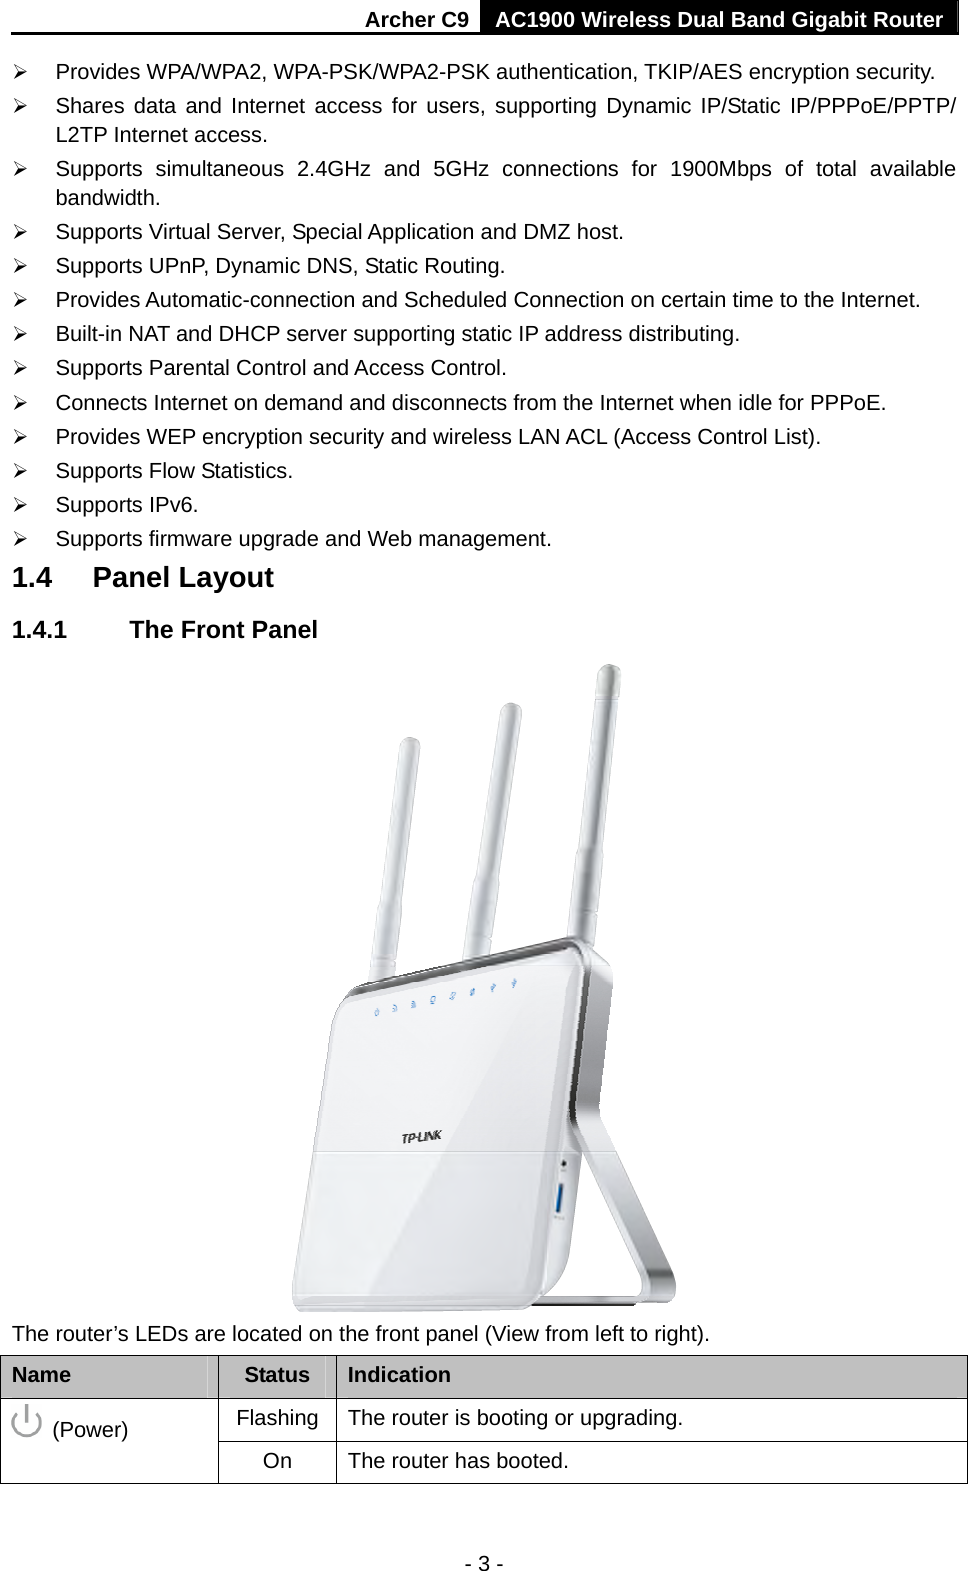 Archer C9 AC1900 Wireless Dual Band Gigabit Router - 3 -  Provides WPA/WPA2, WPA-PSK/WPA2-PSK authentication, TKIP/AES encryption security.  Shares data and Internet access for users, supporting Dynamic IP/Static IP/PPPoE/PPTP/ L2TP Internet access.  Supports simultaneous 2.4GHz and 5GHz connections for 1900Mbps of total available bandwidth.   Supports Virtual Server, Special Application and DMZ host.  Supports UPnP, Dynamic DNS, Static Routing.  Provides Automatic-connection and Scheduled Connection on certain time to the Internet.  Built-in NAT and DHCP server supporting static IP address distributing.  Supports Parental Control and Access Control.  Connects Internet on demand and disconnects from the Internet when idle for PPPoE.  Provides WEP encryption security and wireless LAN ACL (Access Control List).  Supports Flow Statistics.  Supports IPv6.  Supports firmware upgrade and Web management. 1.4  Panel Layout 1.4.1  The Front Panel  The router’s LEDs are located on the front panel (View from left to right).   Name  Status  Indication Flashing    The router is booting or upgrading.  (Power) On  The router has booted. 